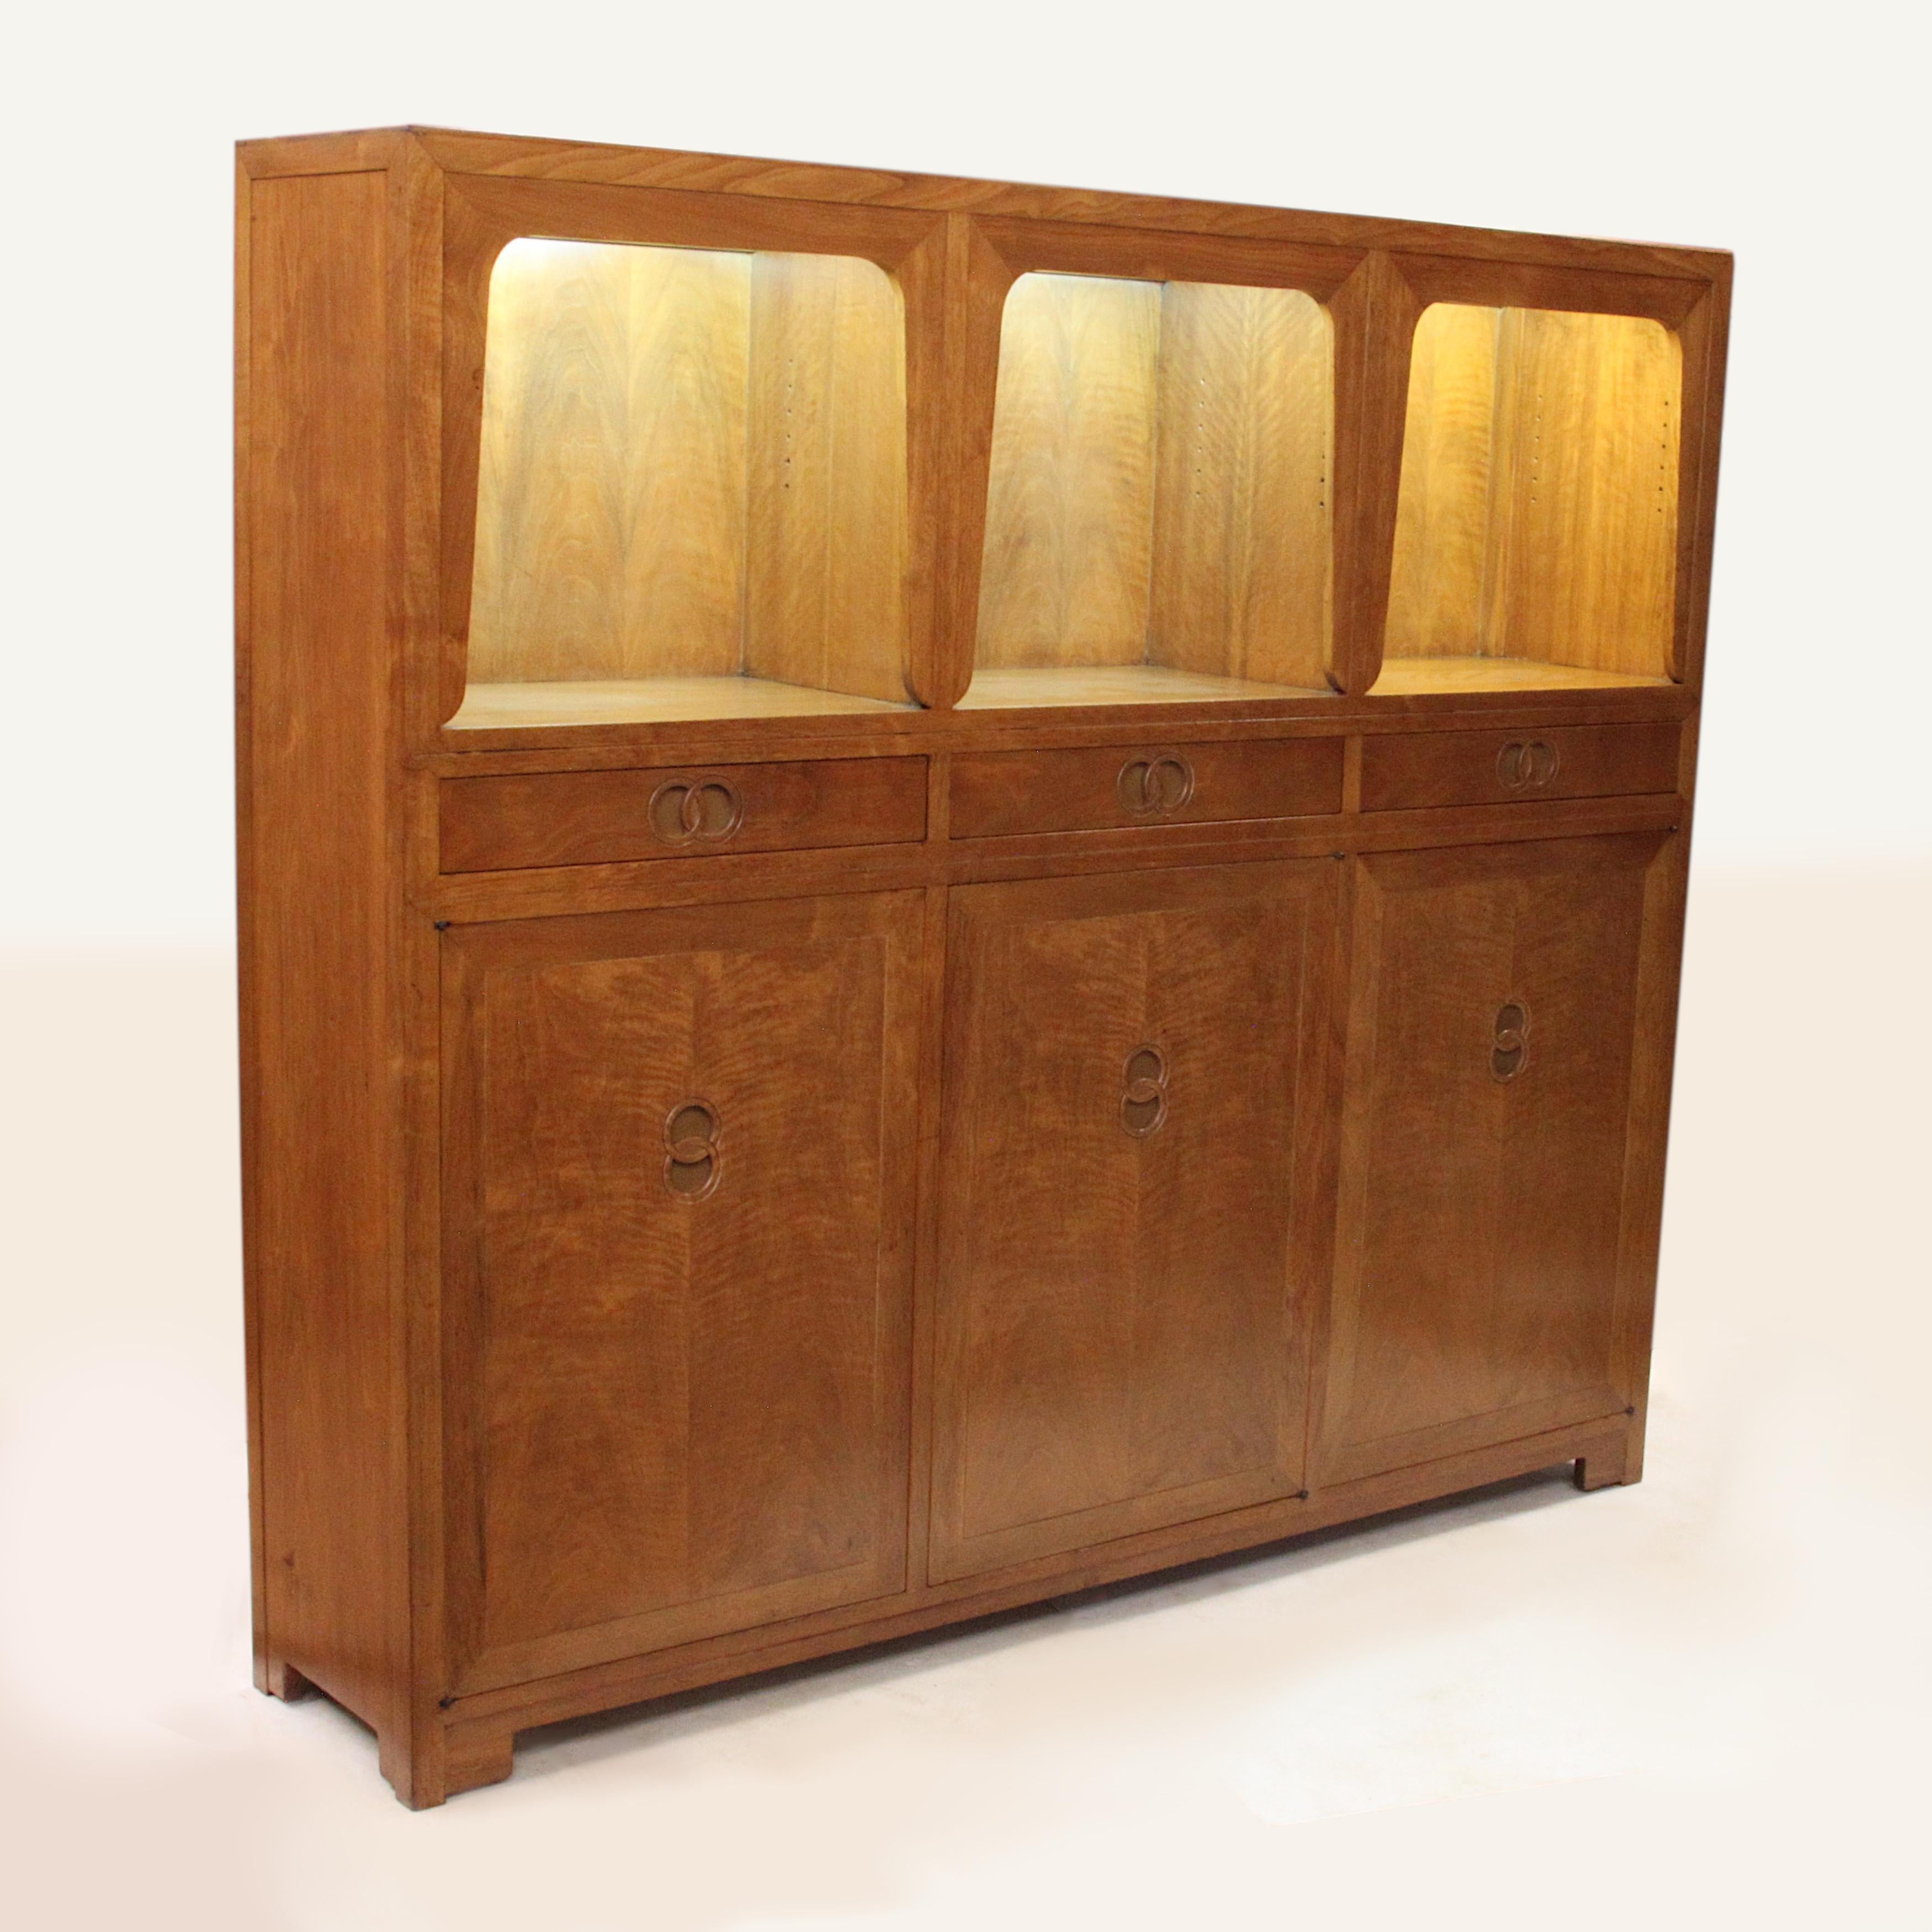 Wonderful Model 2589 Cabinet designed by Michael Taylor for Baker Furniture as part of the Far East Collection. This piece features solid walnut construction, adjustable shelves in the lower cabinet, integrated lighting in the upper cabinet, unique,